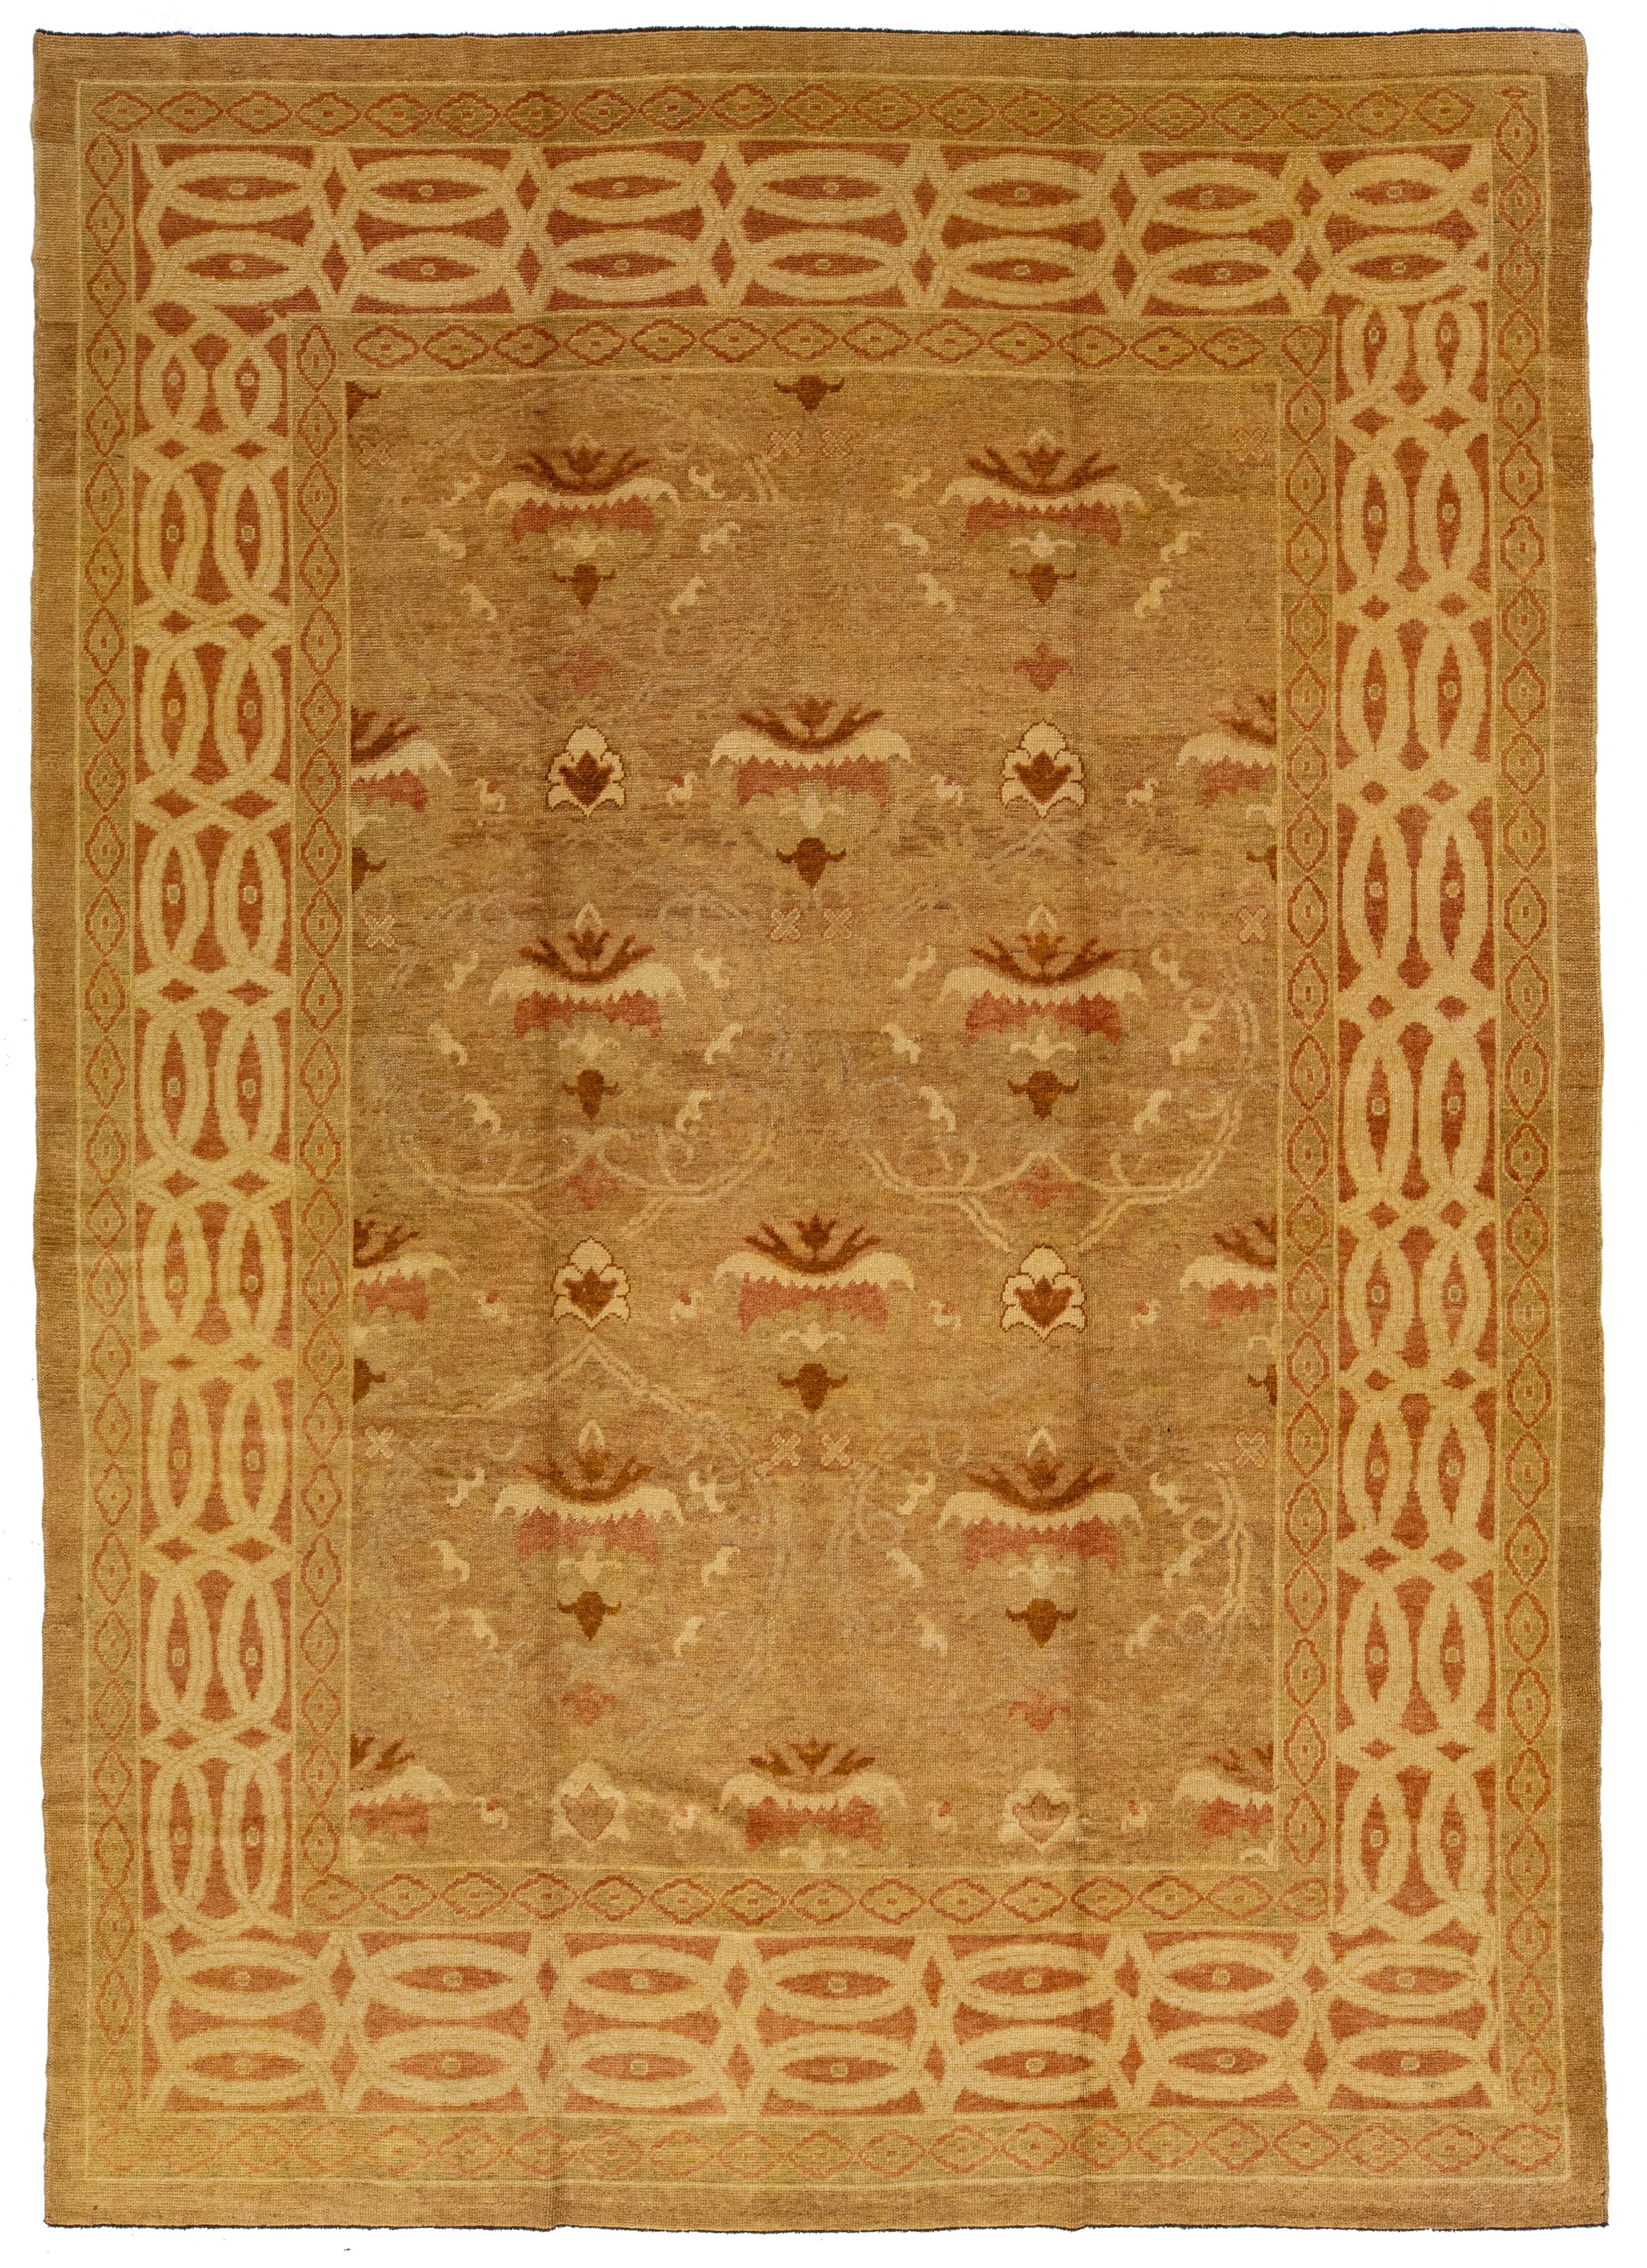 Handmade Contemporary Oushak Wool Rug with Floral Pattern in Tan